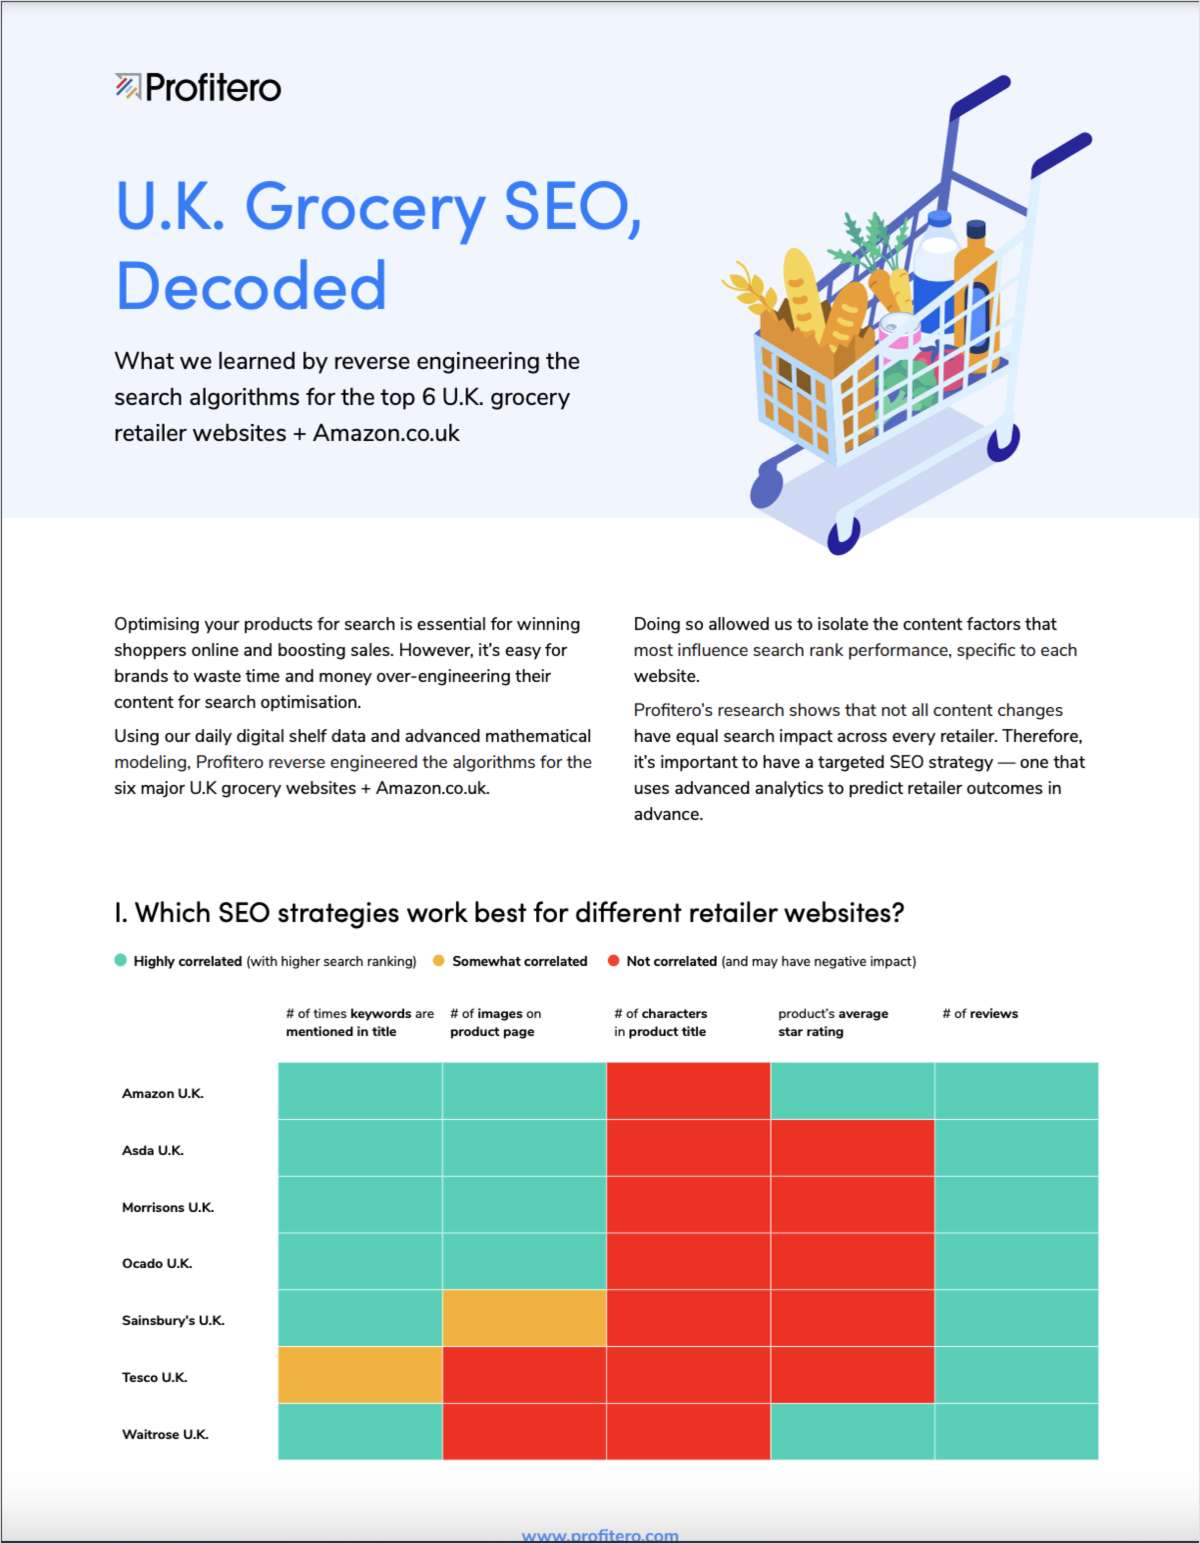 UK Grocery SEO - Decoded